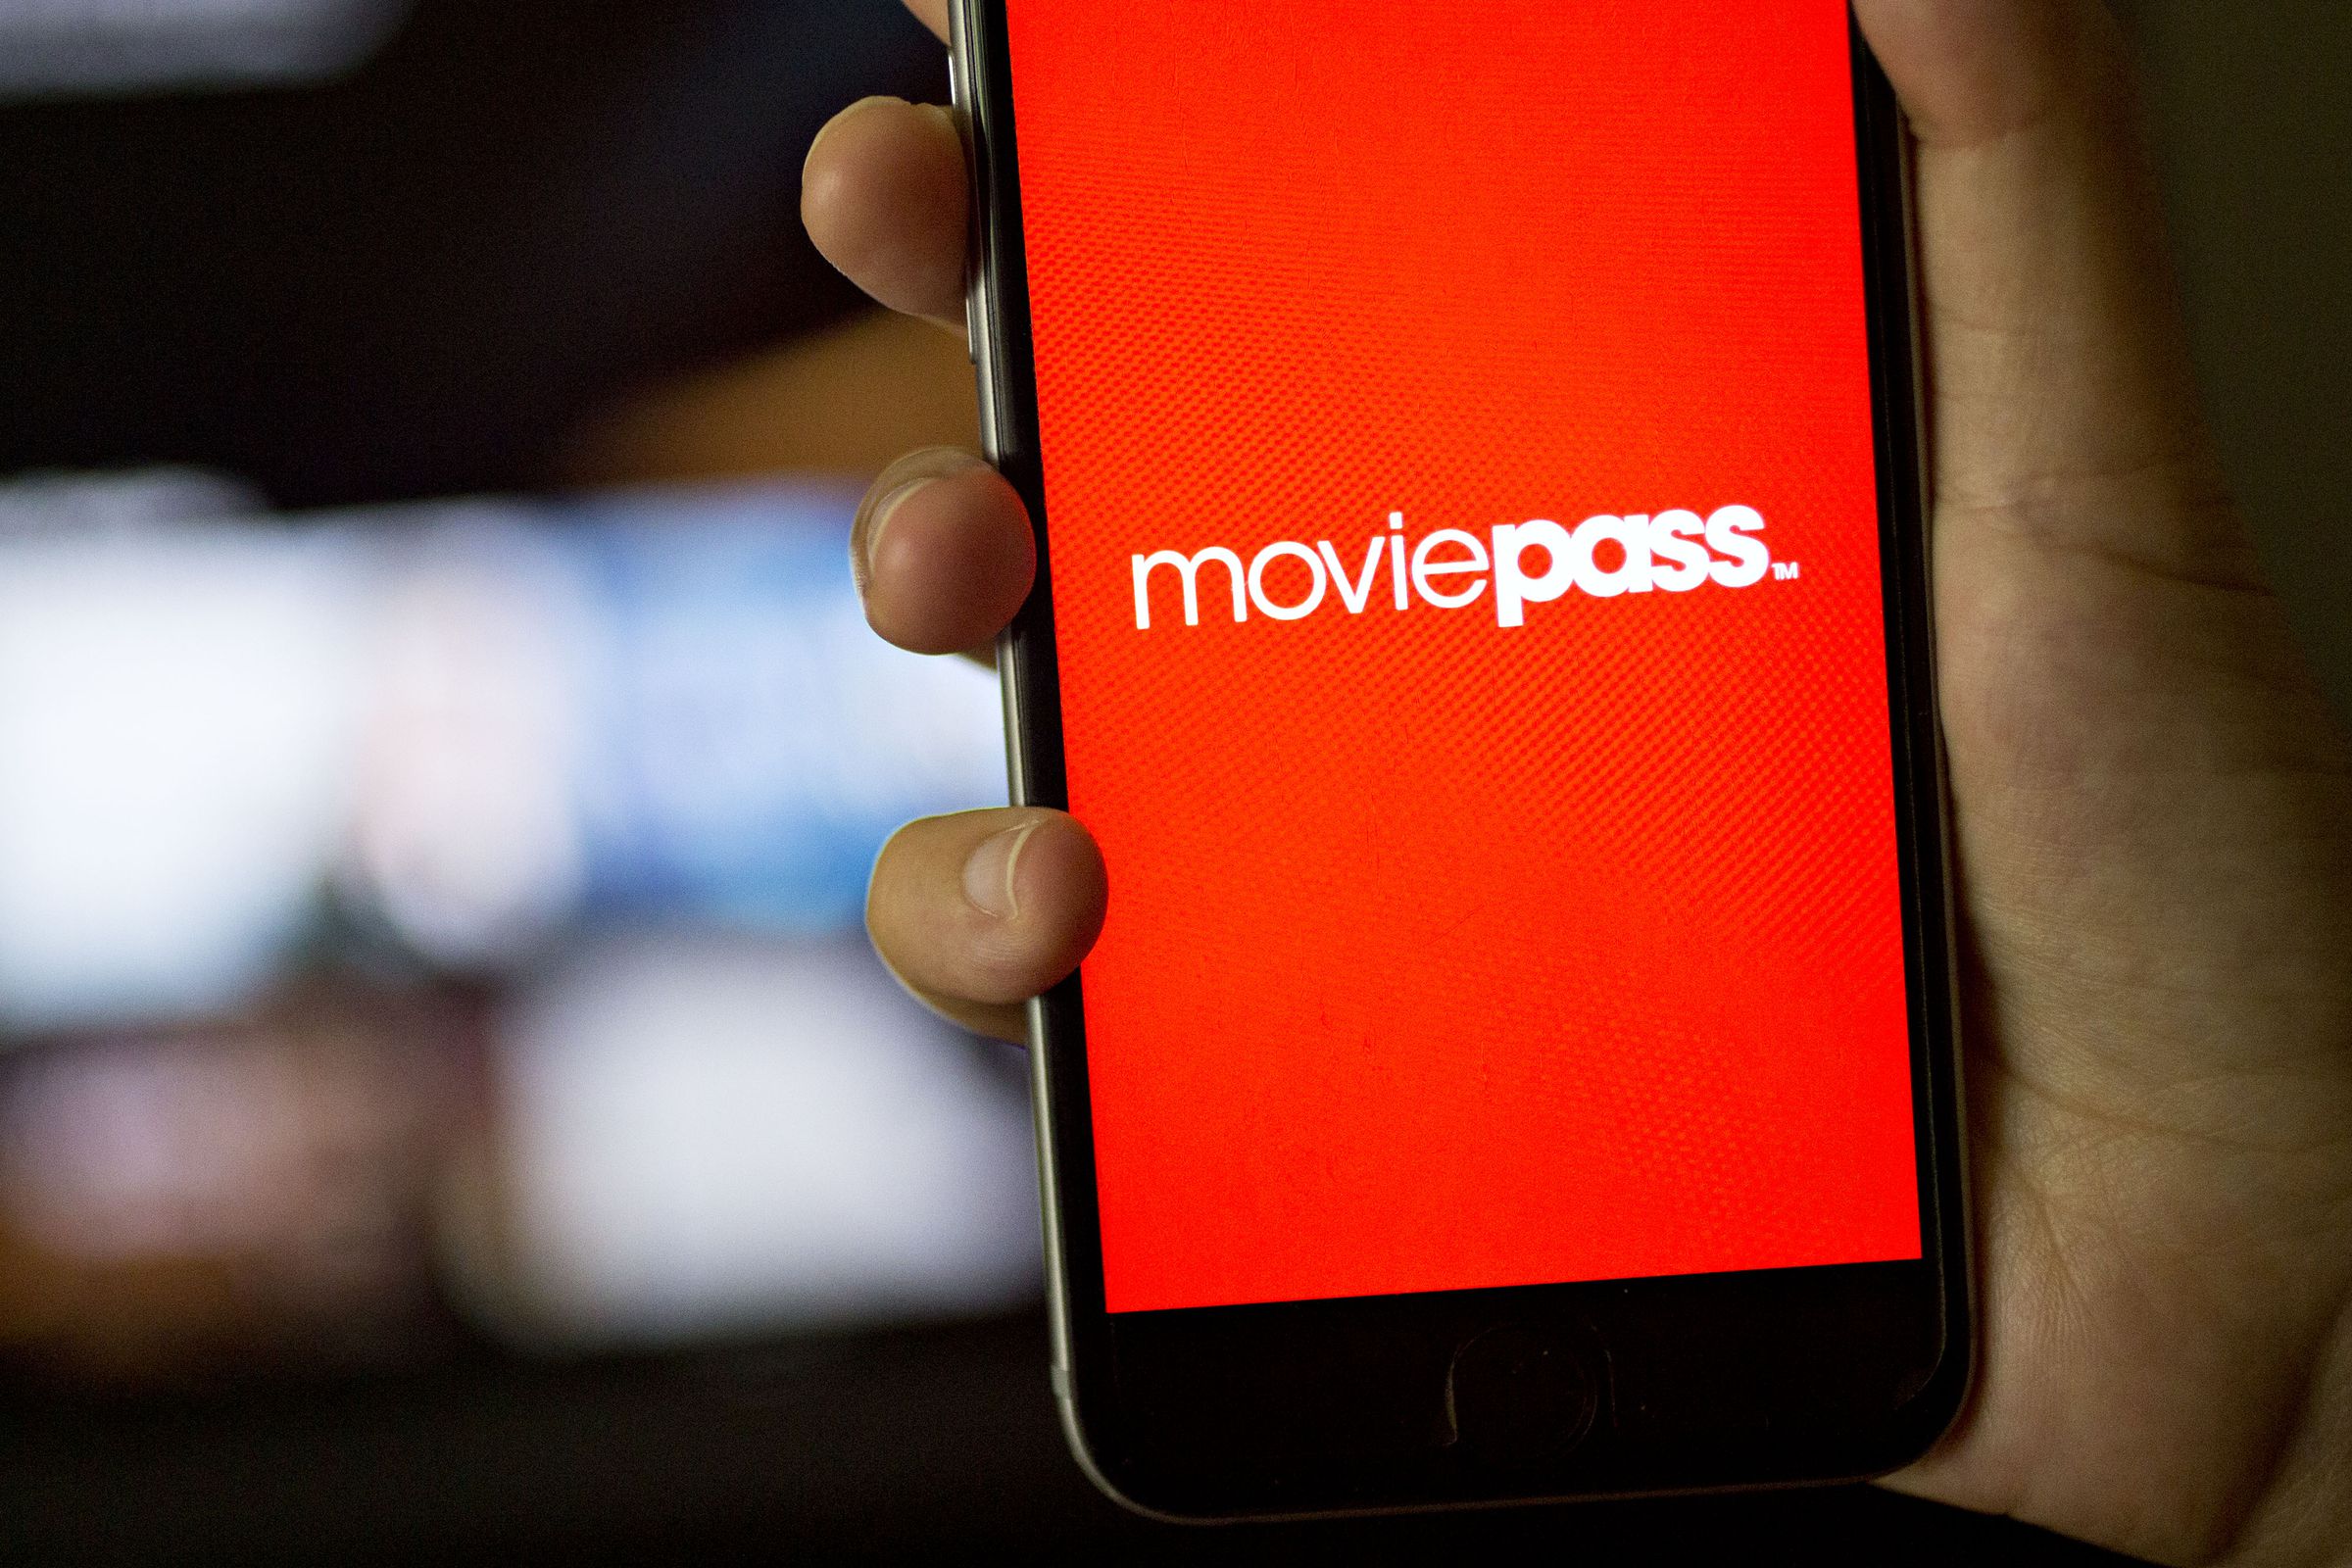 MoviePass App As Company Makes It Harder To See Movies